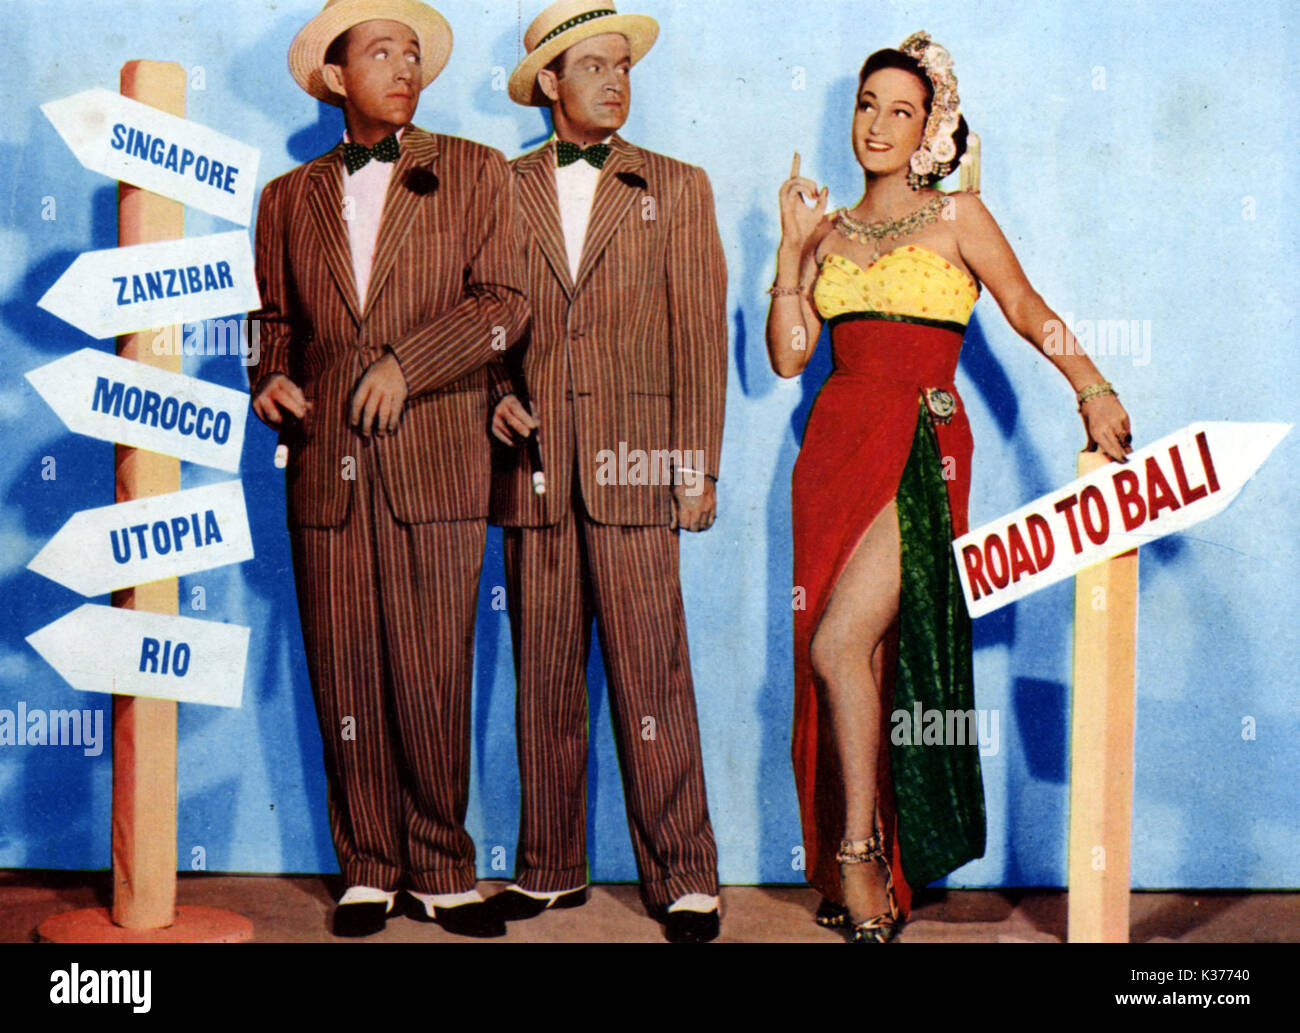 ROAD TO BALI Bing Crosby, Bob Hope and Dorothy Lamour     Date: 1952 Stock Photo